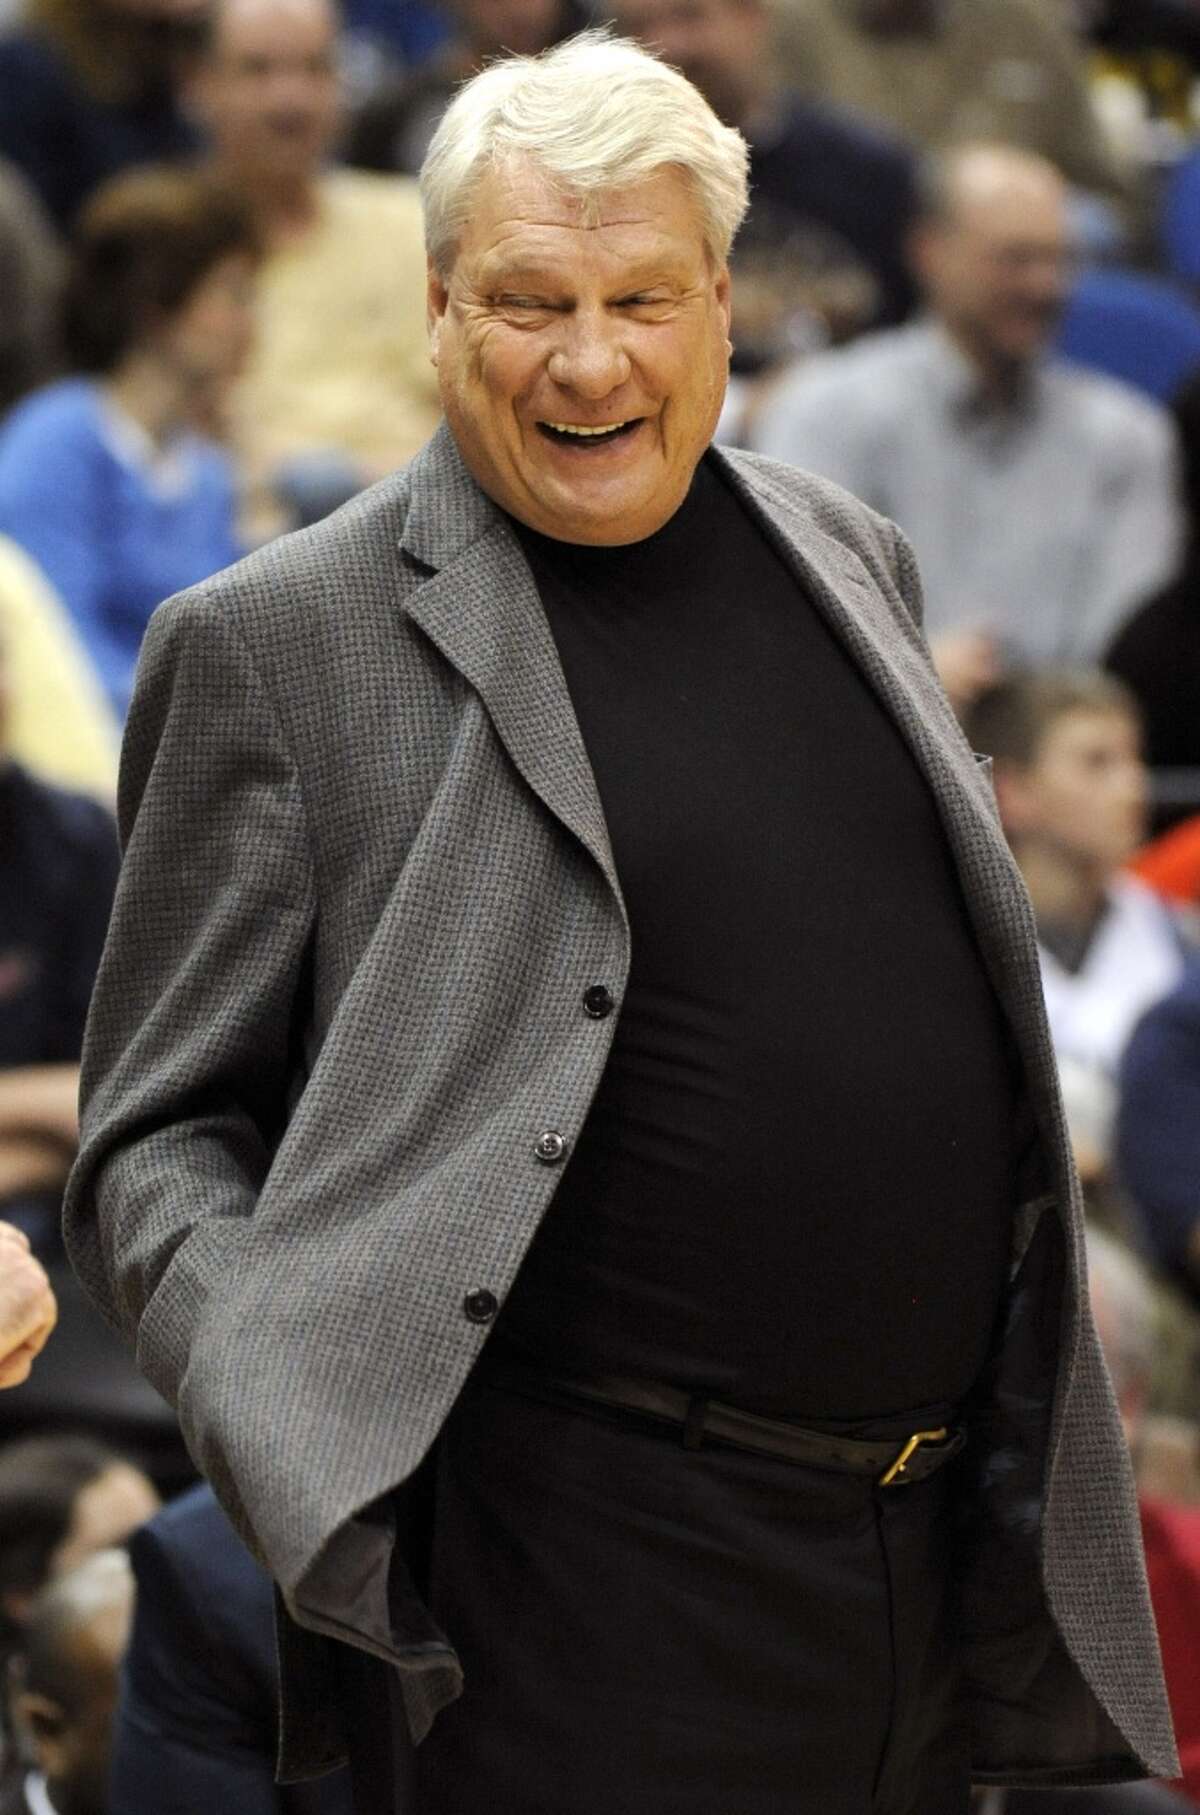 Don Nelson: No title and 1,335 wins with the Bucks, Warriors, Knicks and Mavericks